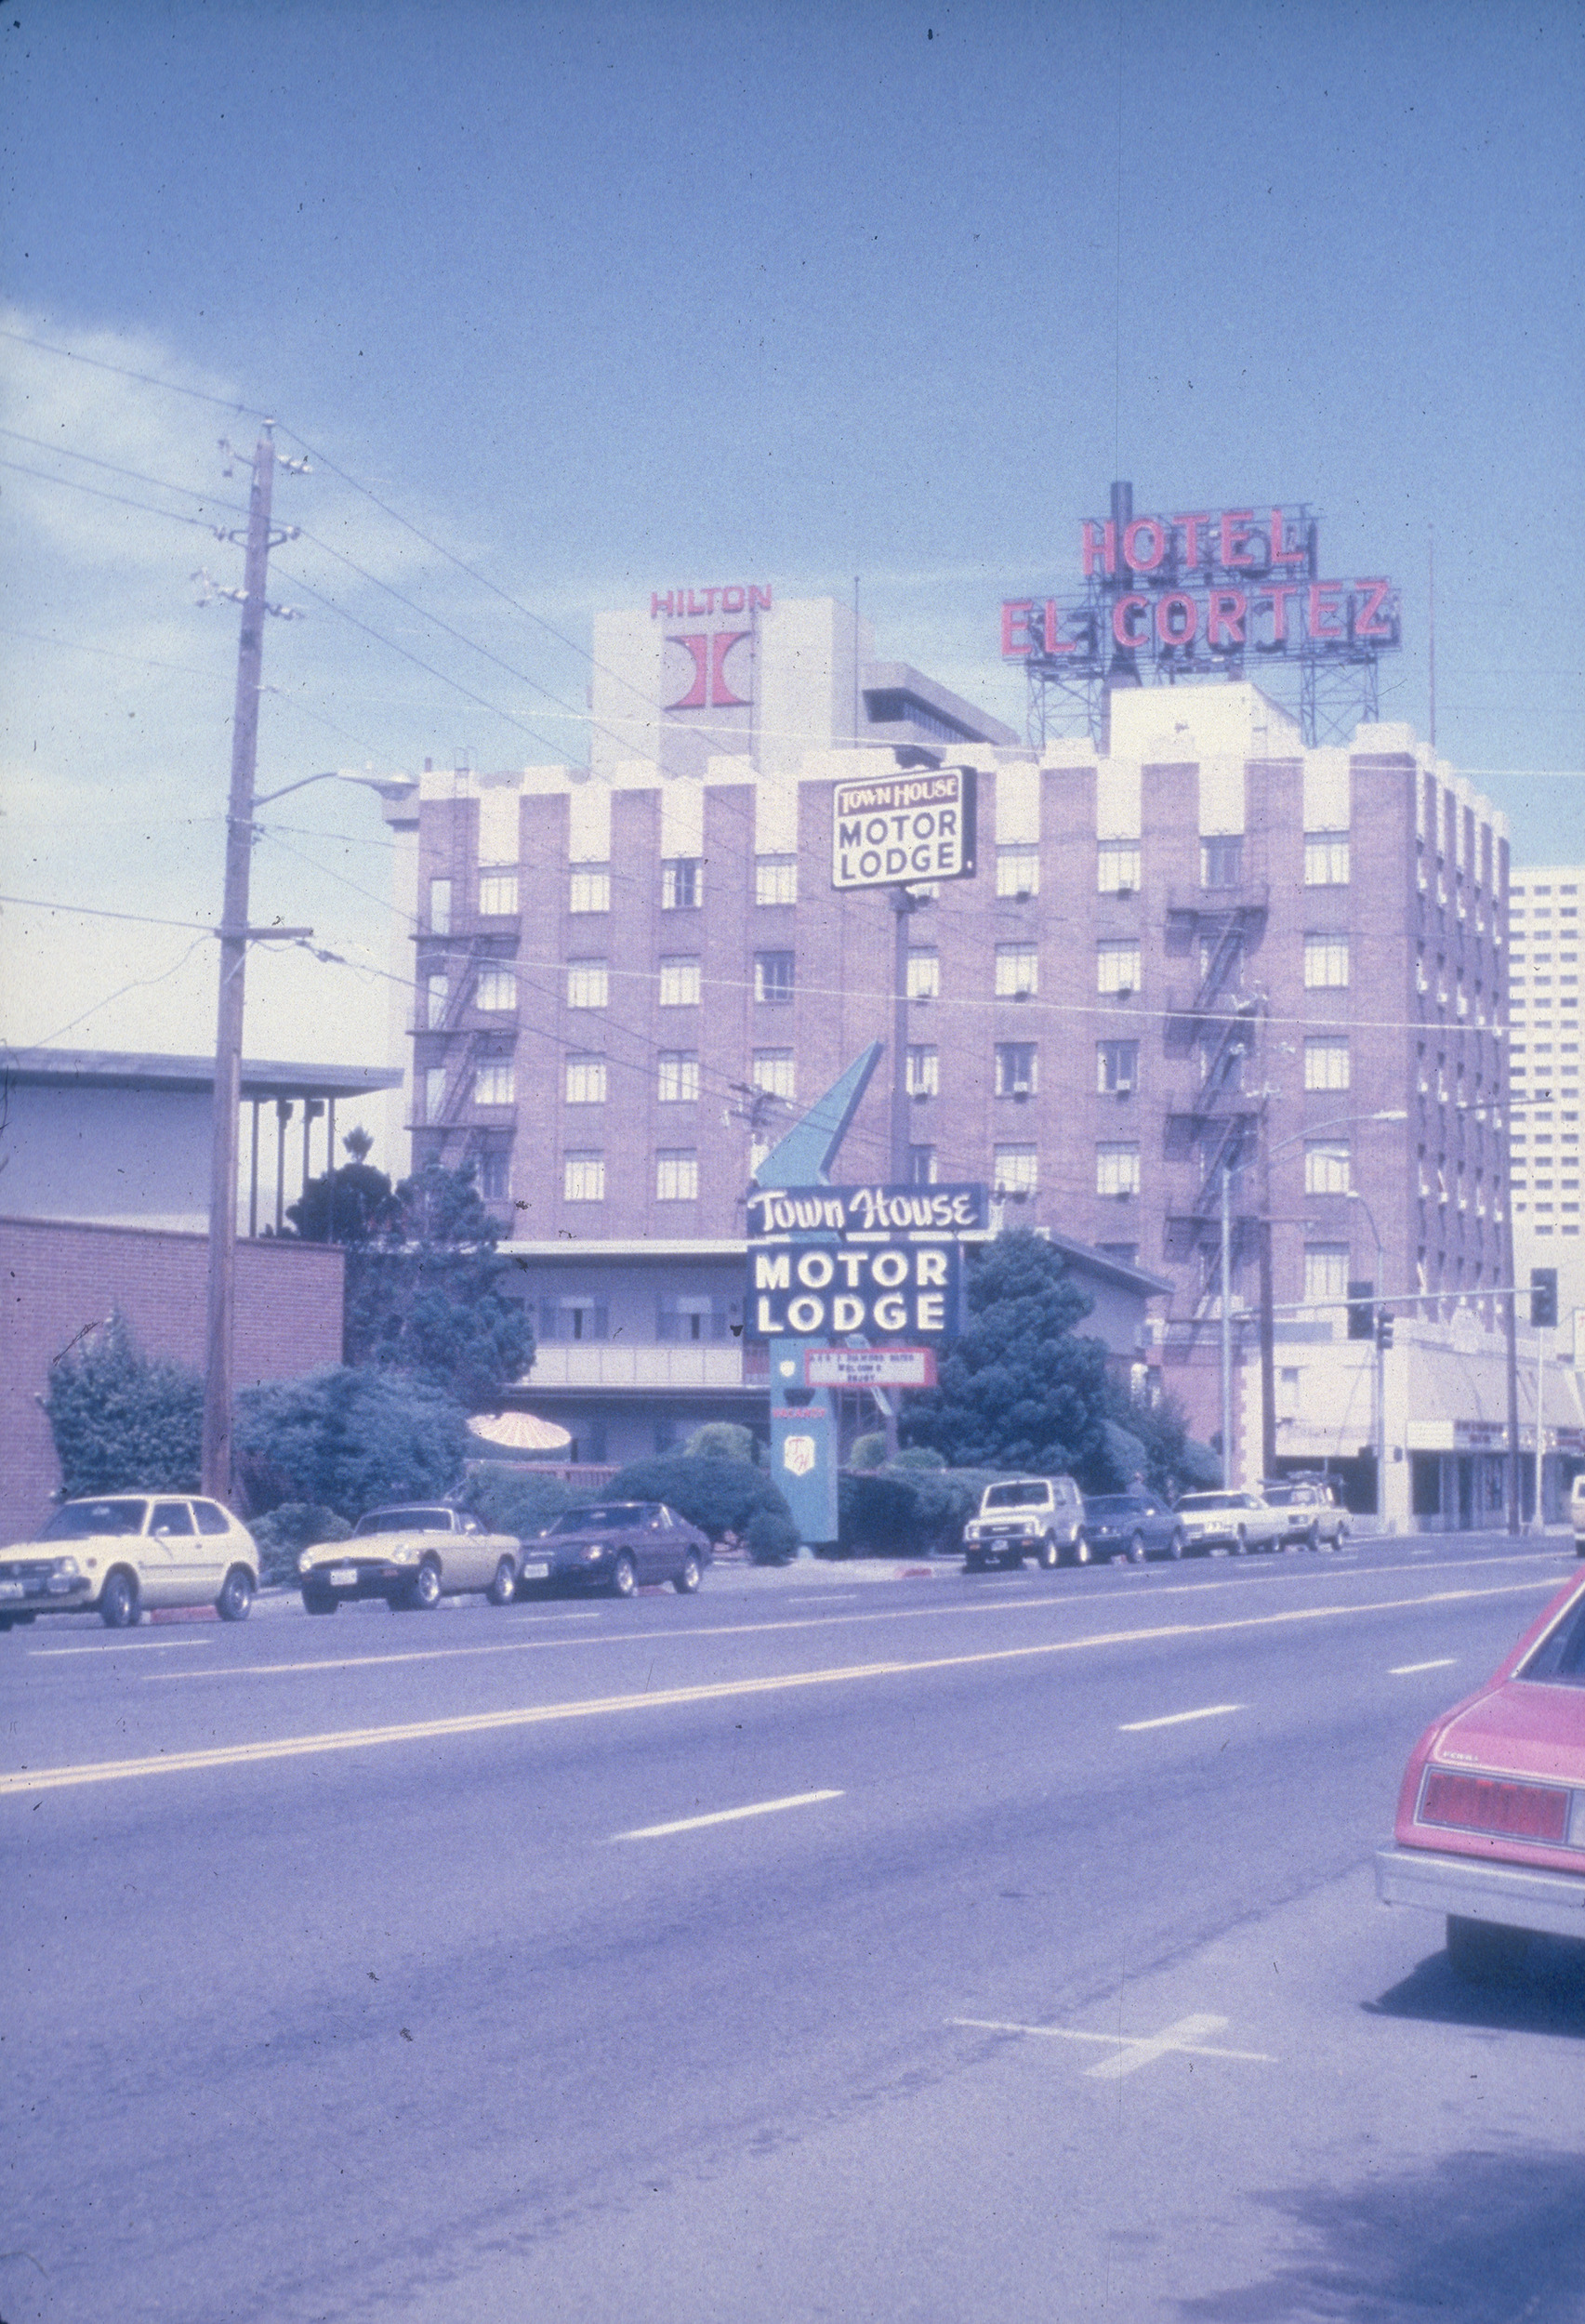 Slide of the Town House Motor Lodge and its neon sign, Reno, Nevada, 1986